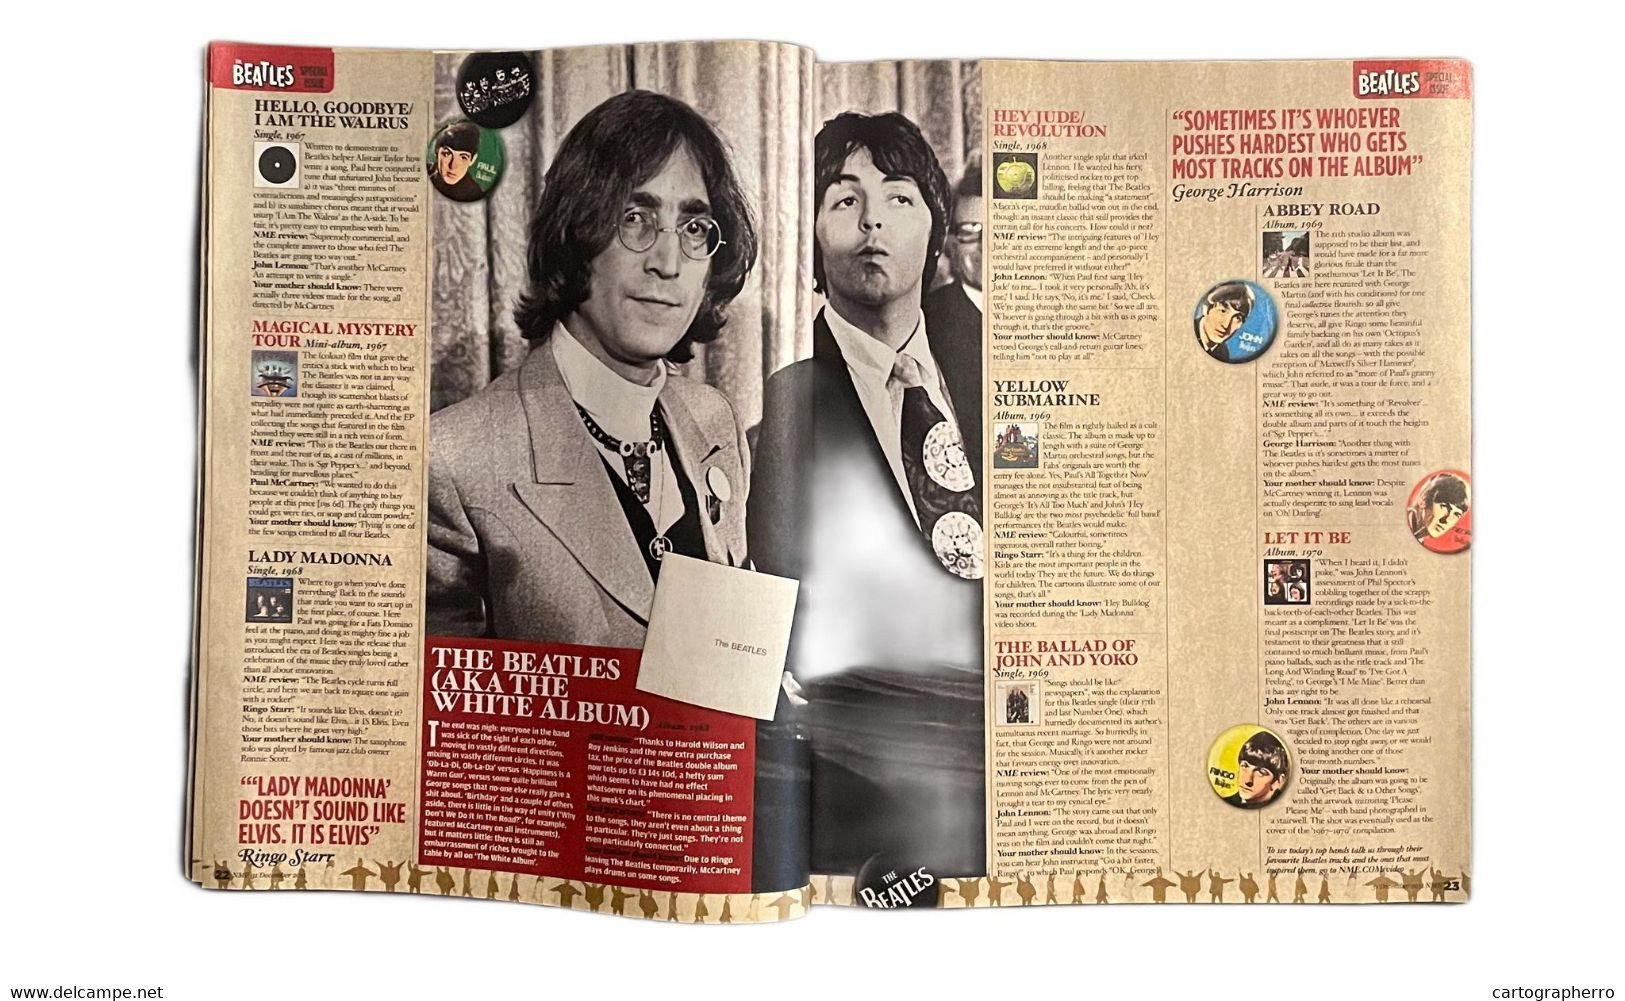 Beatles anniversary issue NME magazine 31 December 2011 Special collector`s edition Liam Gallagher poster included